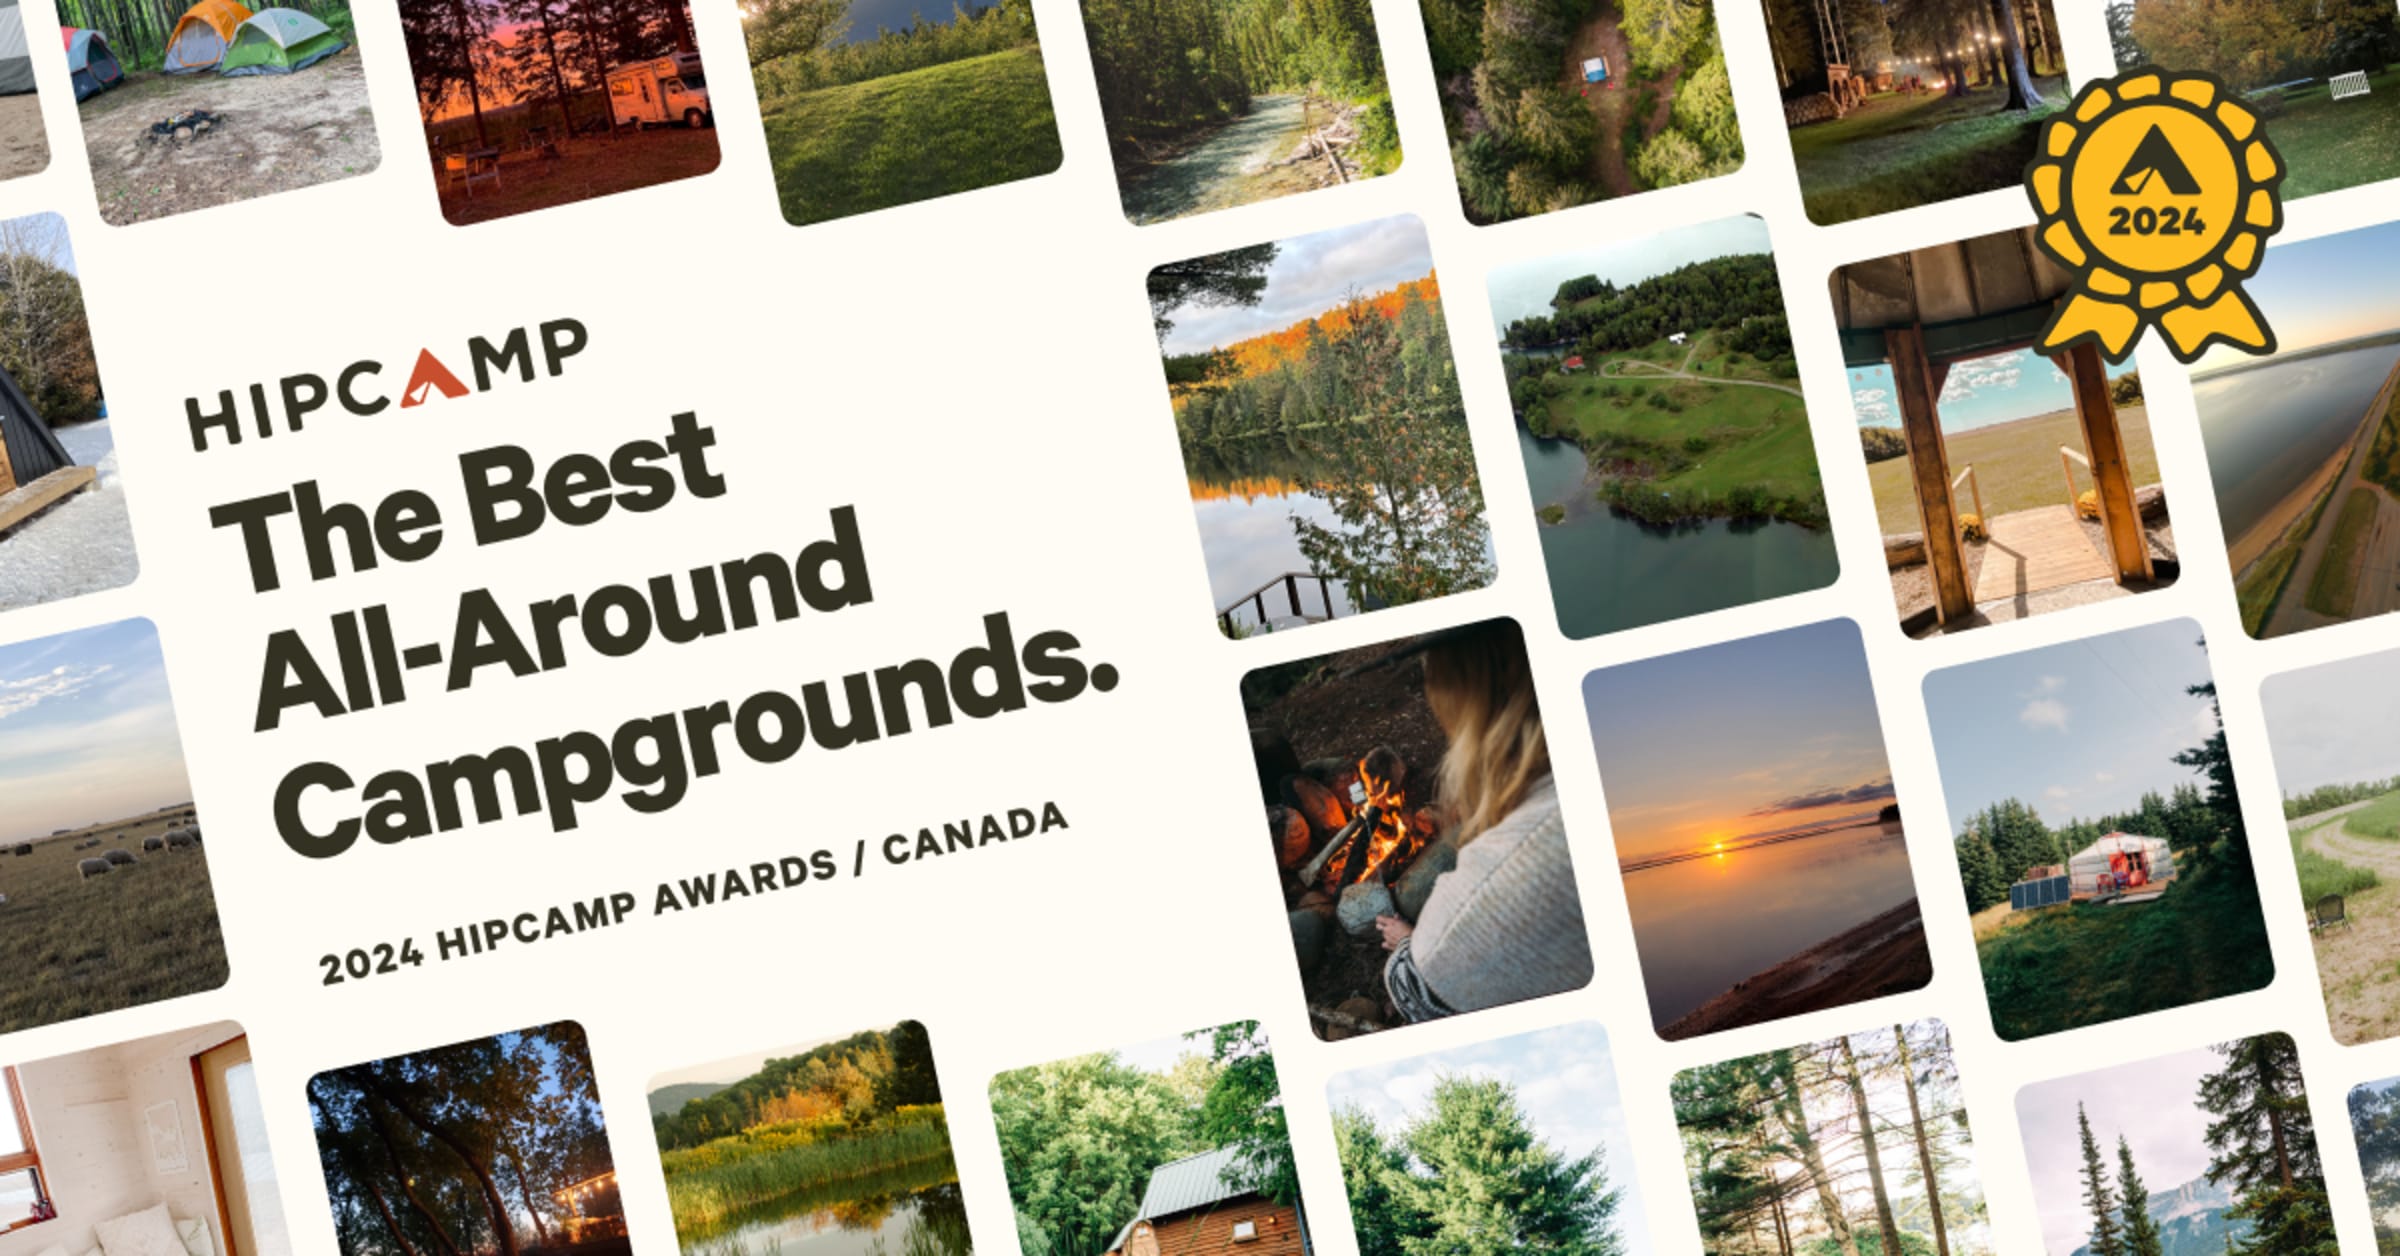 Hipcamp Awards 2024: Best All-Around Campgrounds in Canada